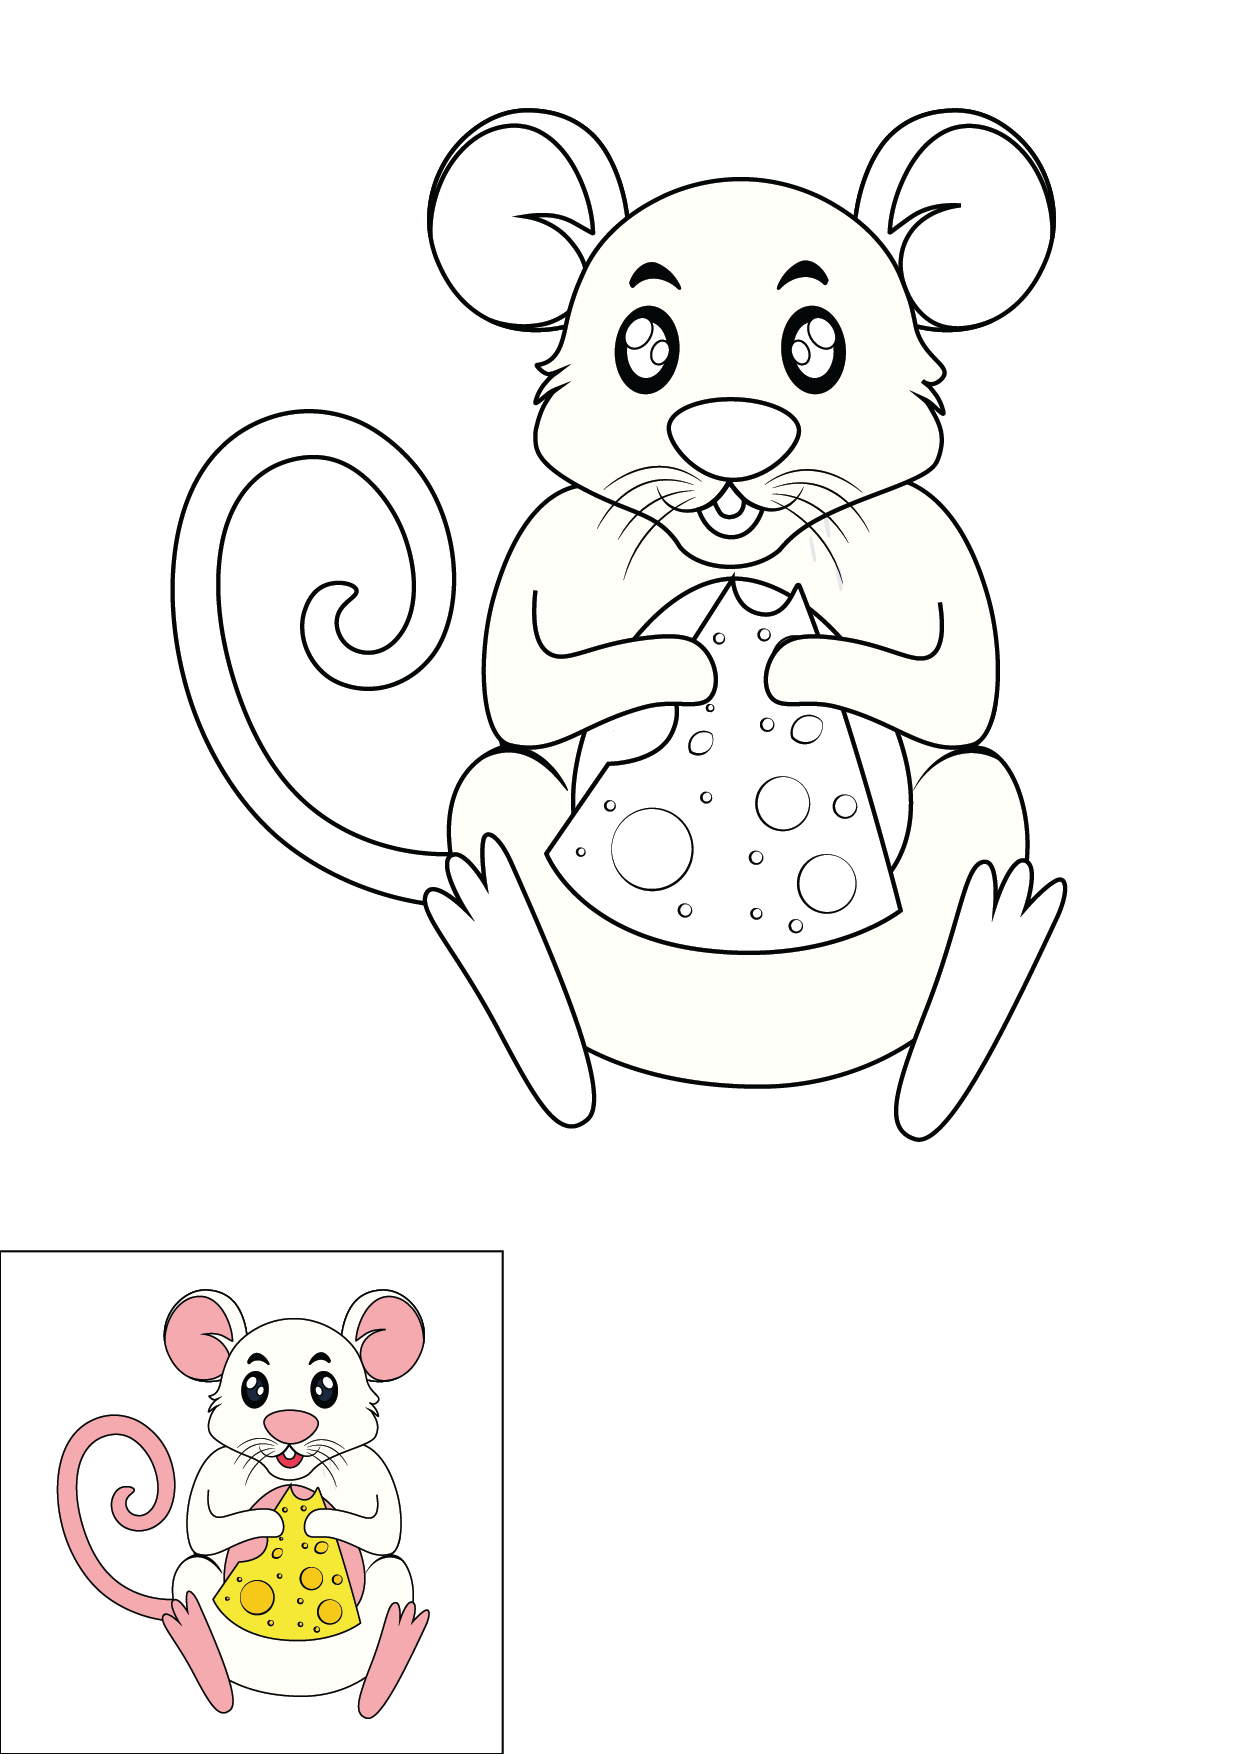 How to Draw A Rat Step by Step Printable Color